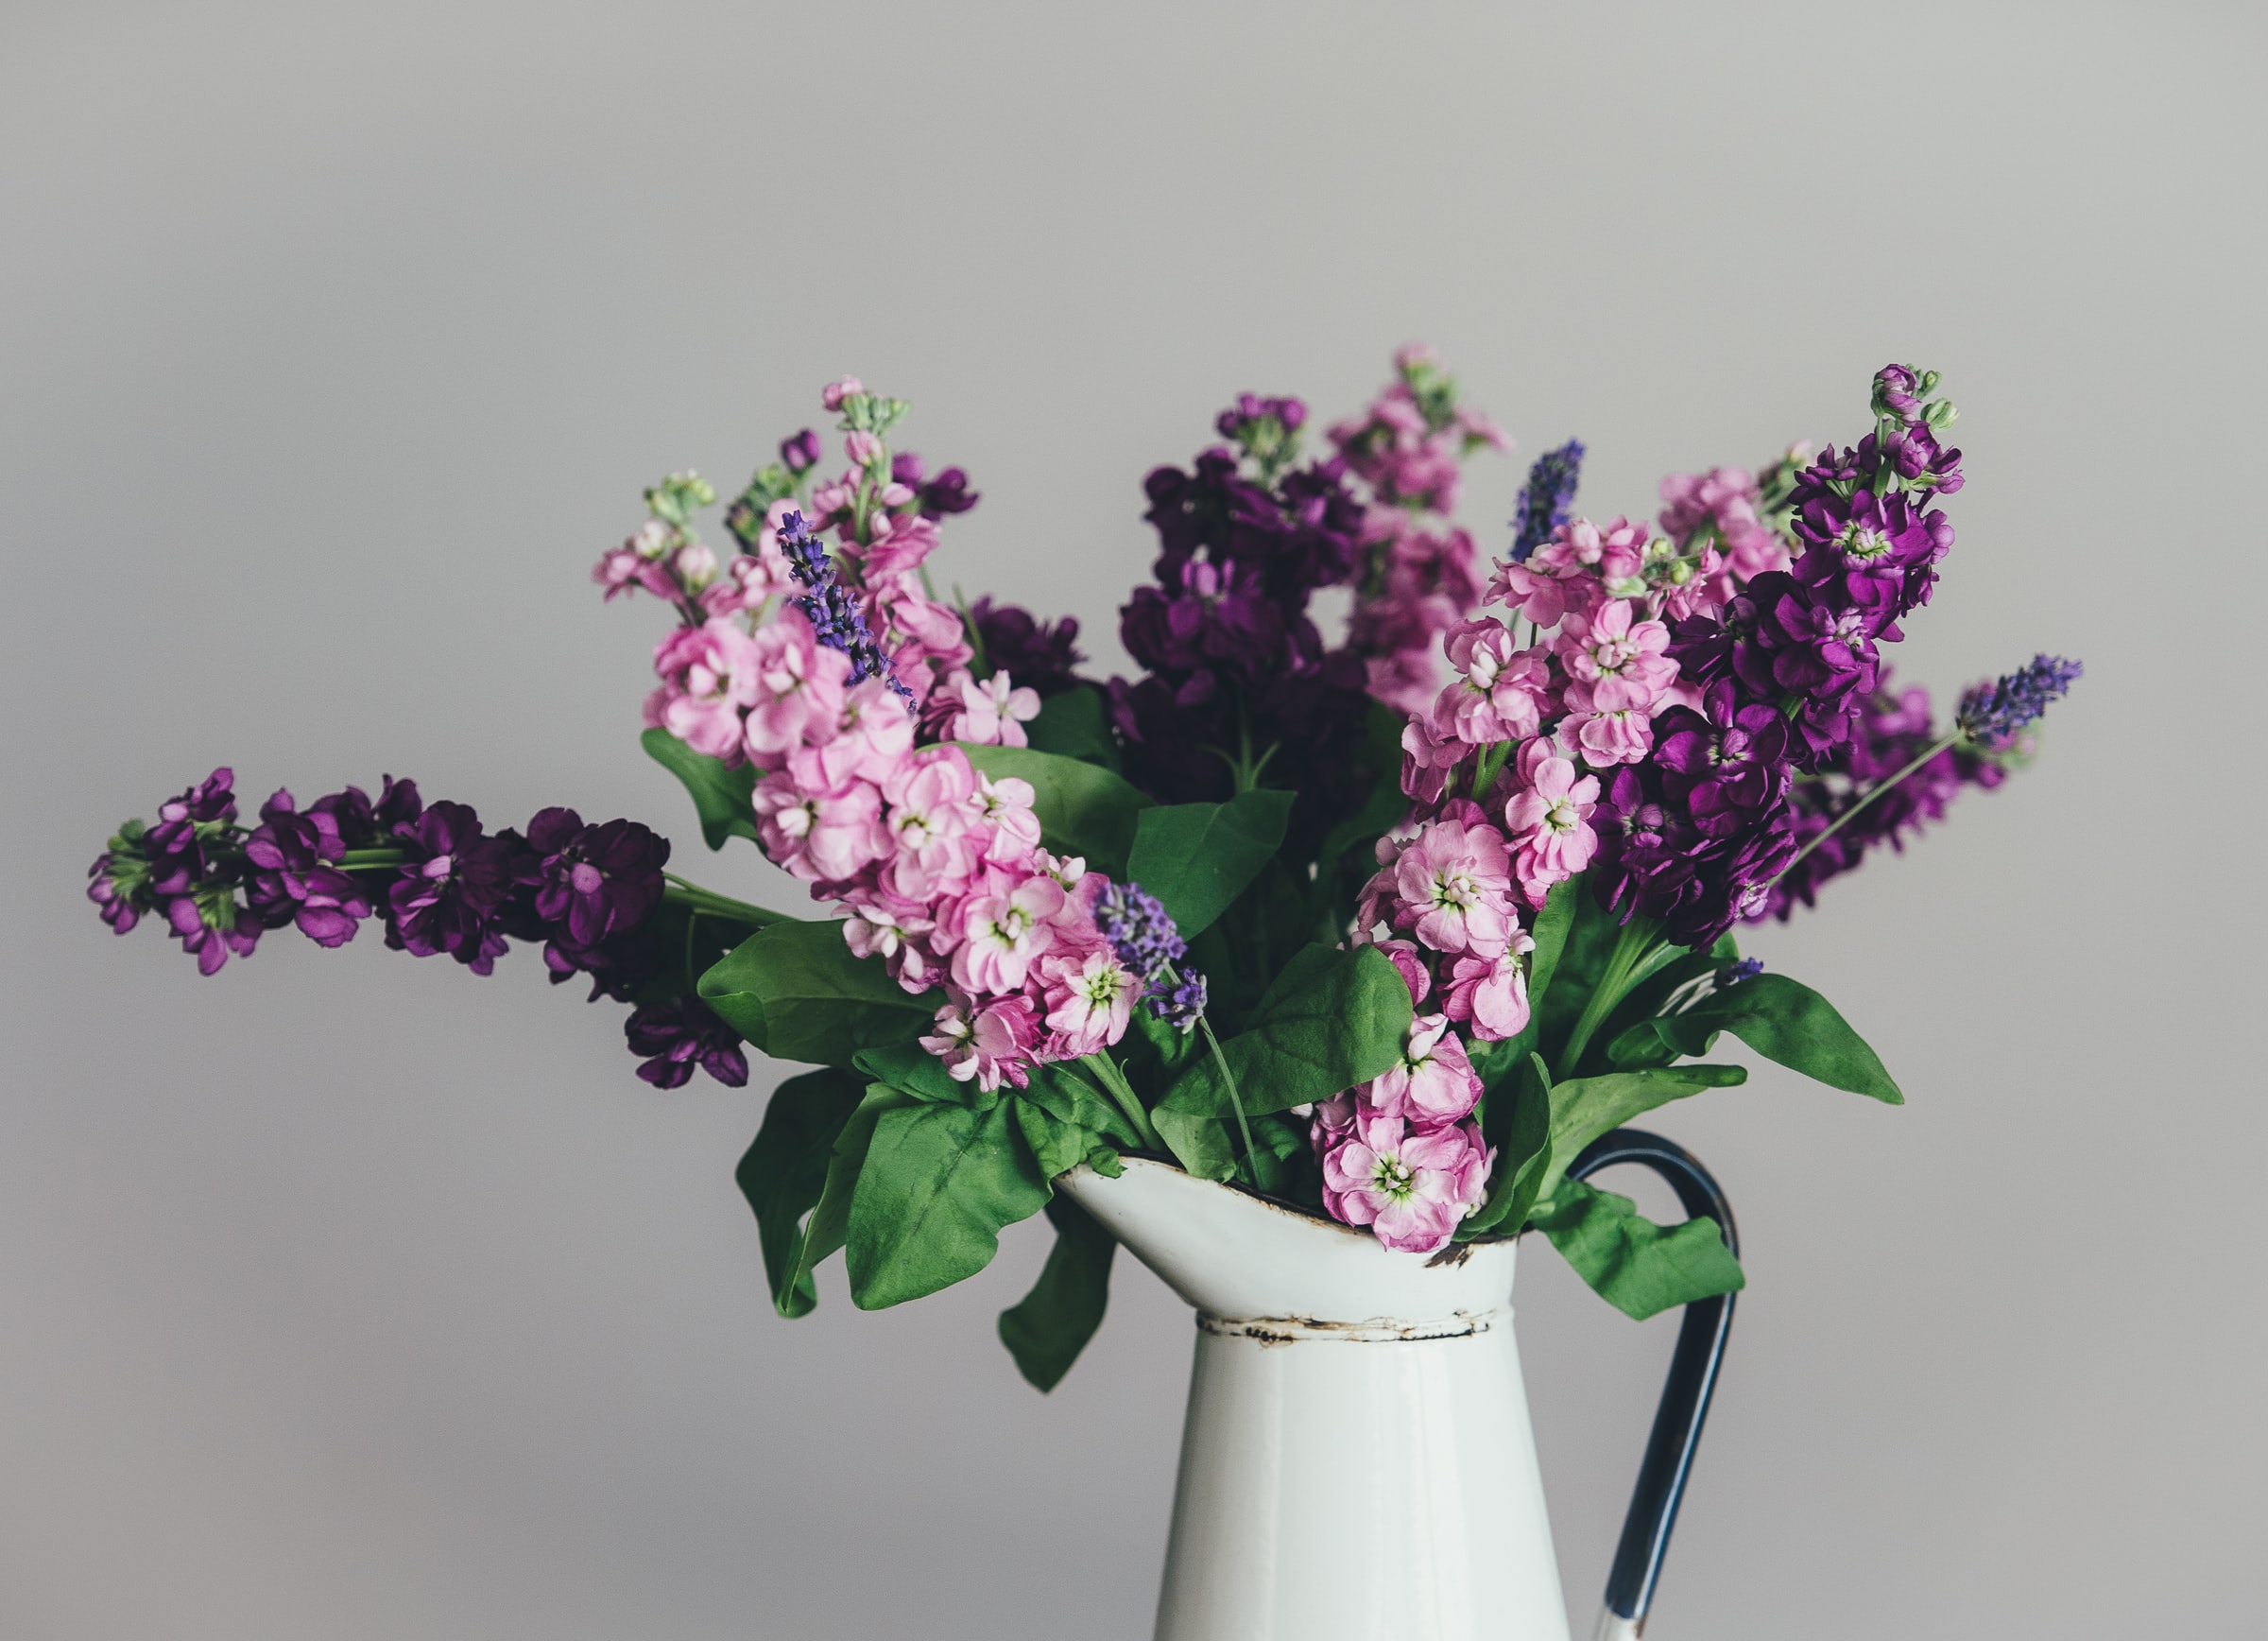 12 Ideas to Decorate with Artificial Flowers in Winter - Saffron's